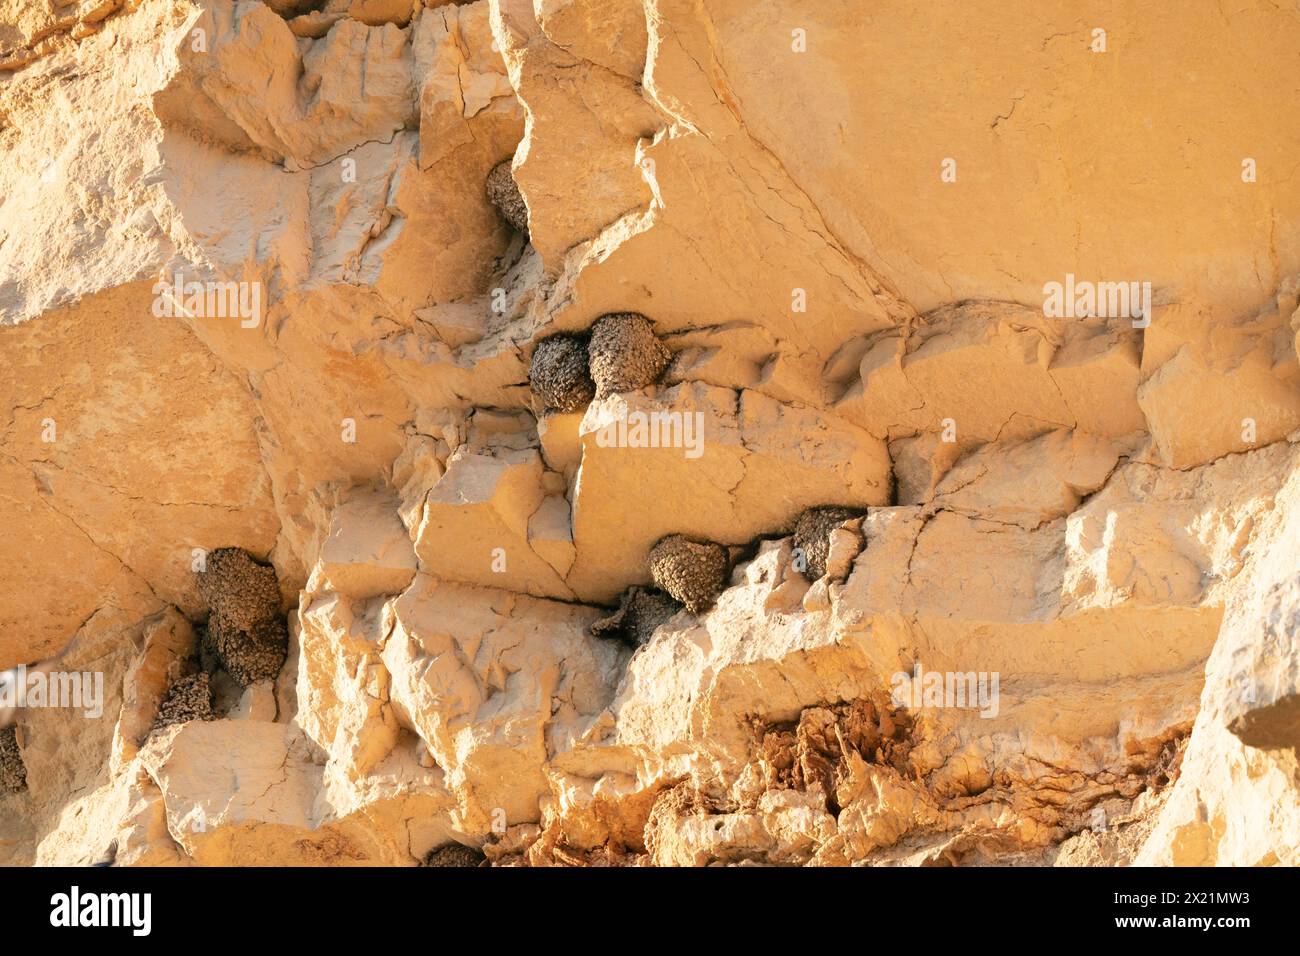 crag martin (Ptyonoprogne rupestris, Hirundo rupestris), swallows' nests on a wind-protected, dry and sunlit rock face, Spain Stock Photo